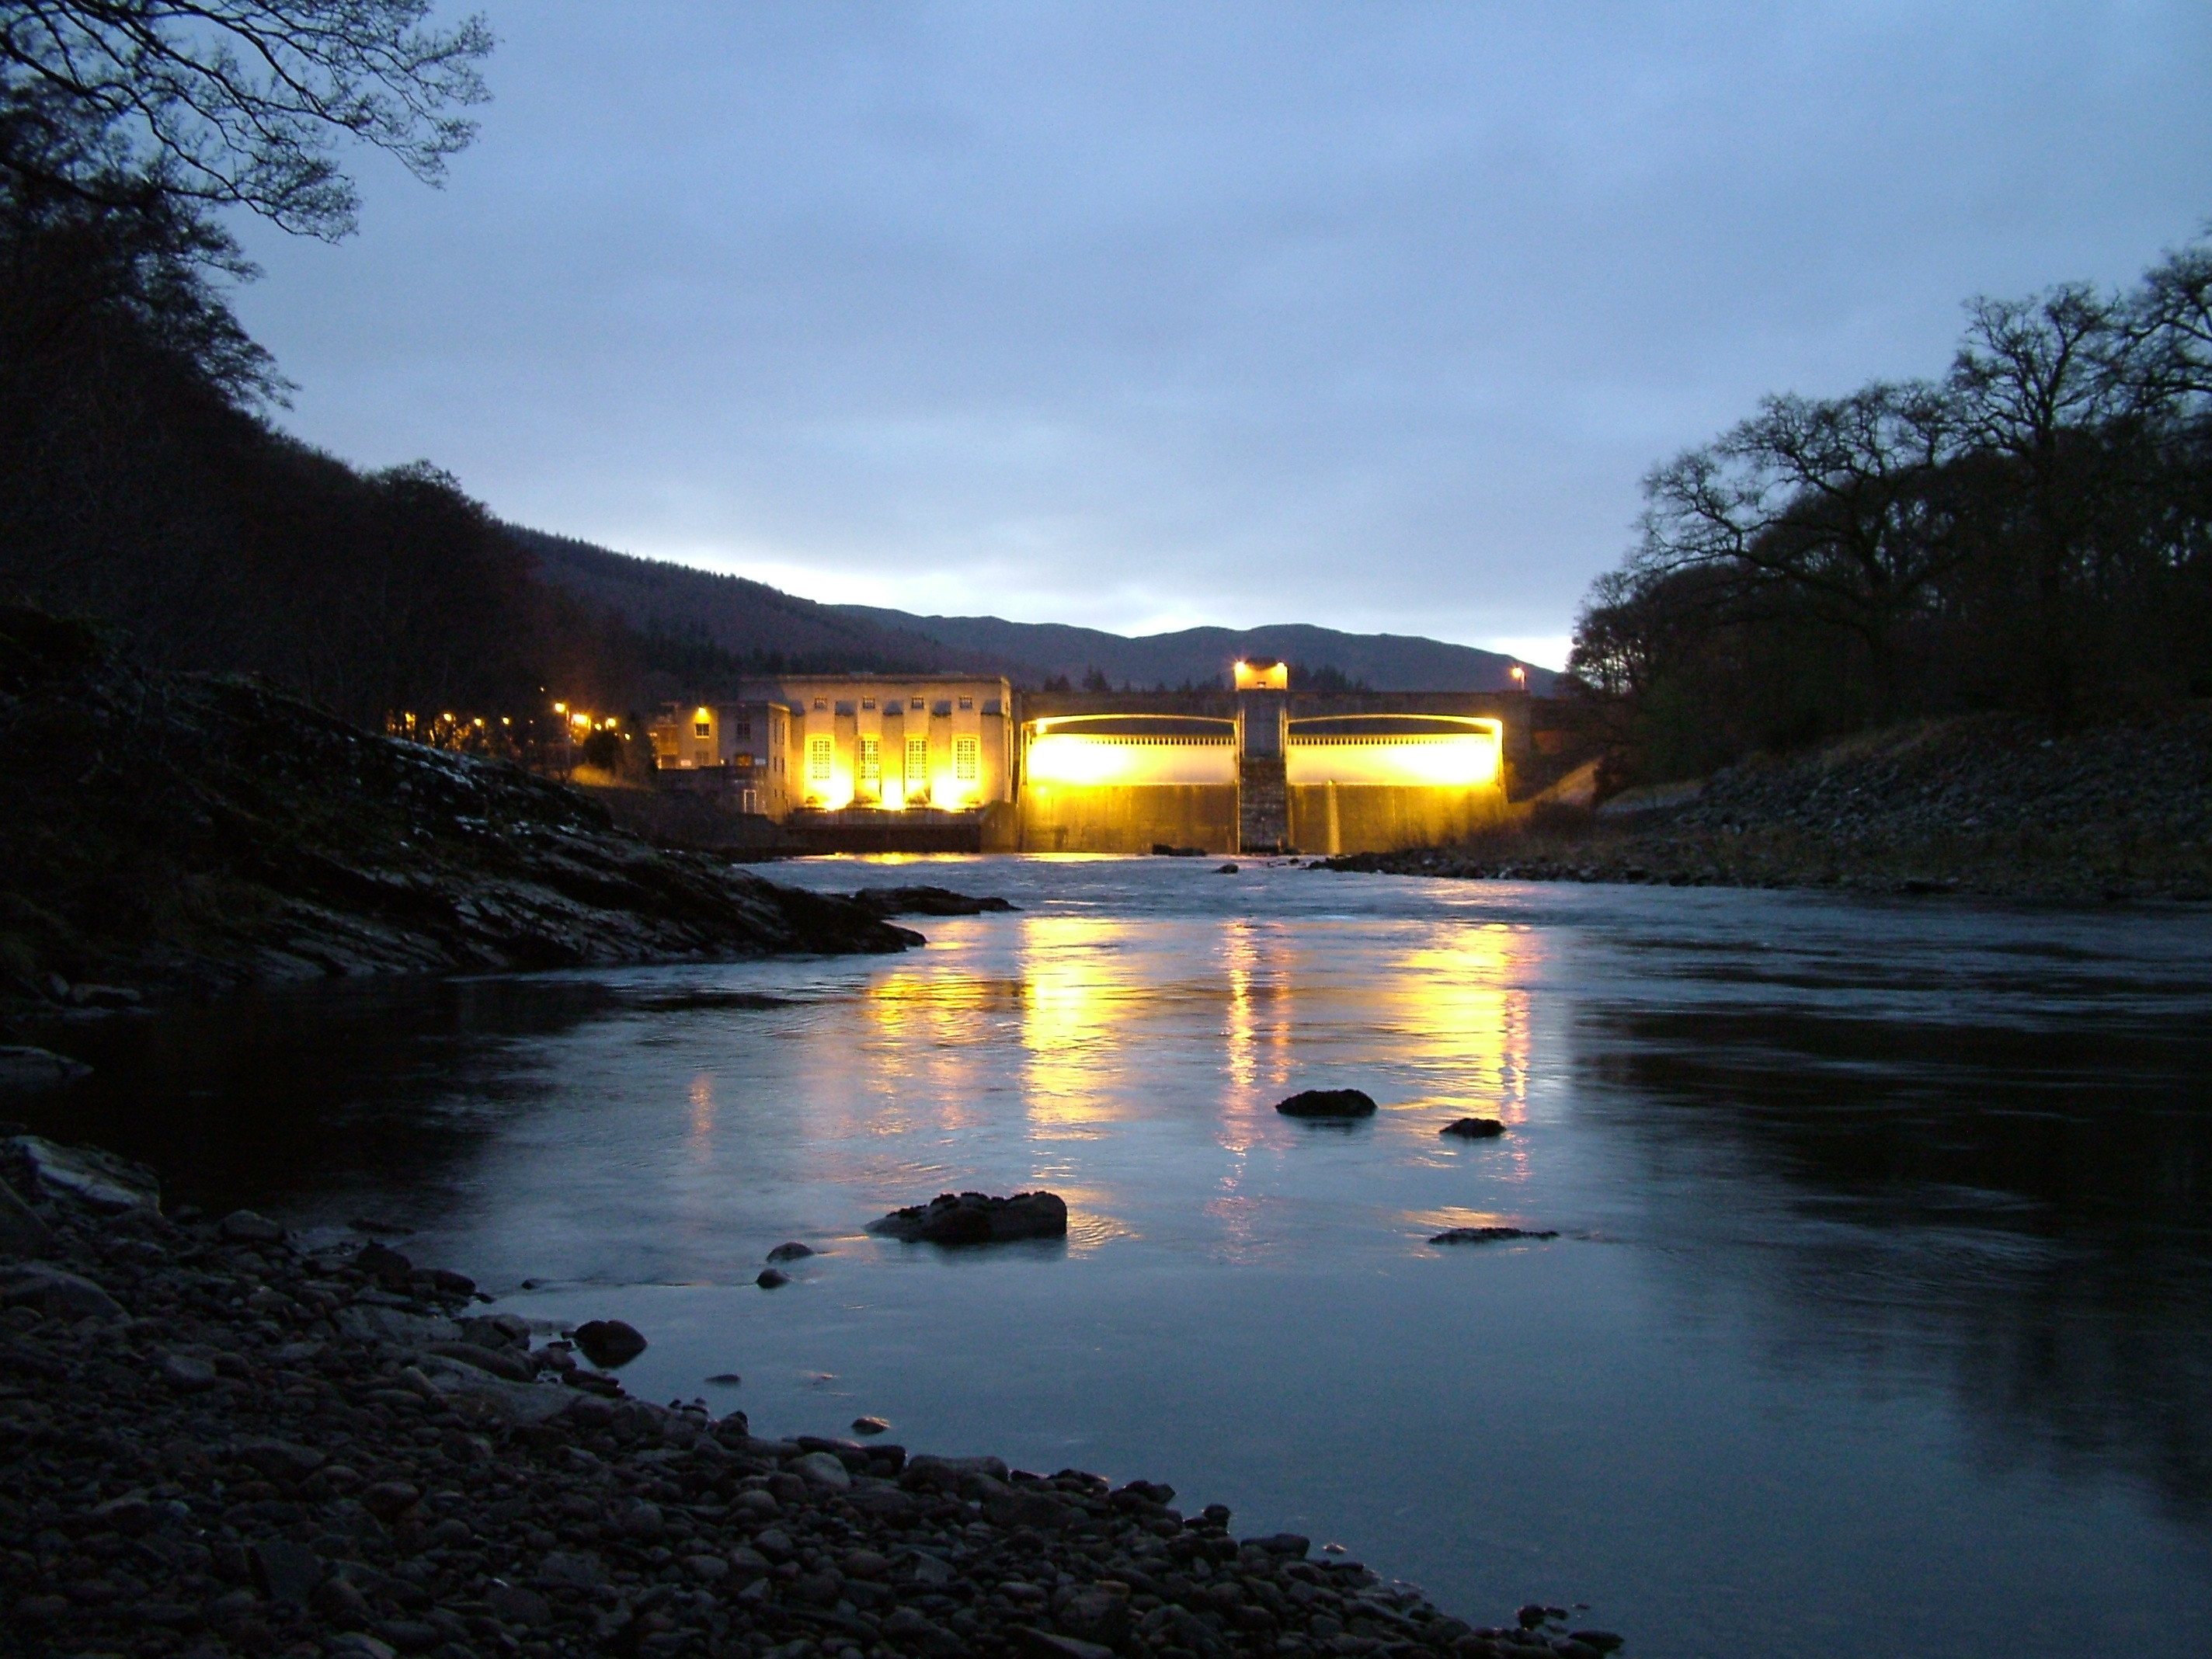 The new centre at Pitlochry Dam will tell the story of hydroelectric power in Scotland